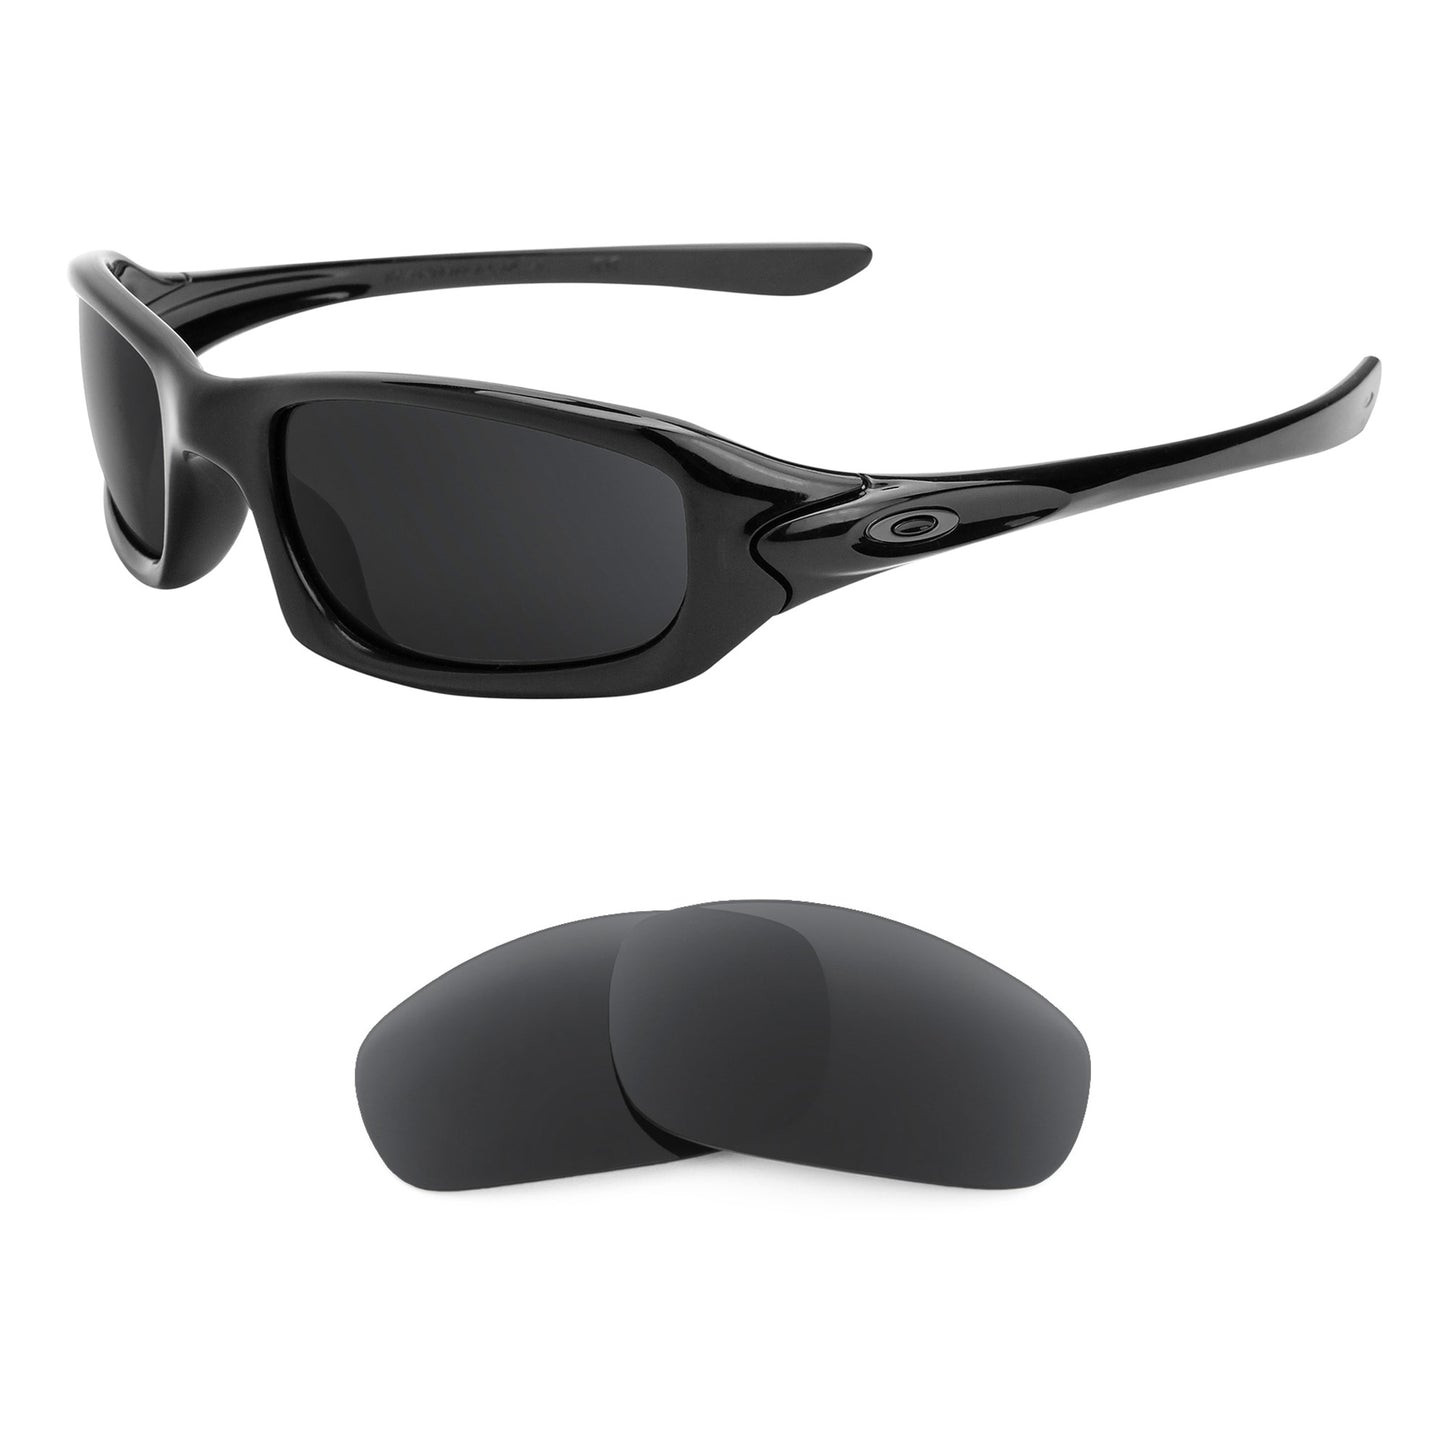 Oakley Fives 4.0 sunglasses with replacement lenses